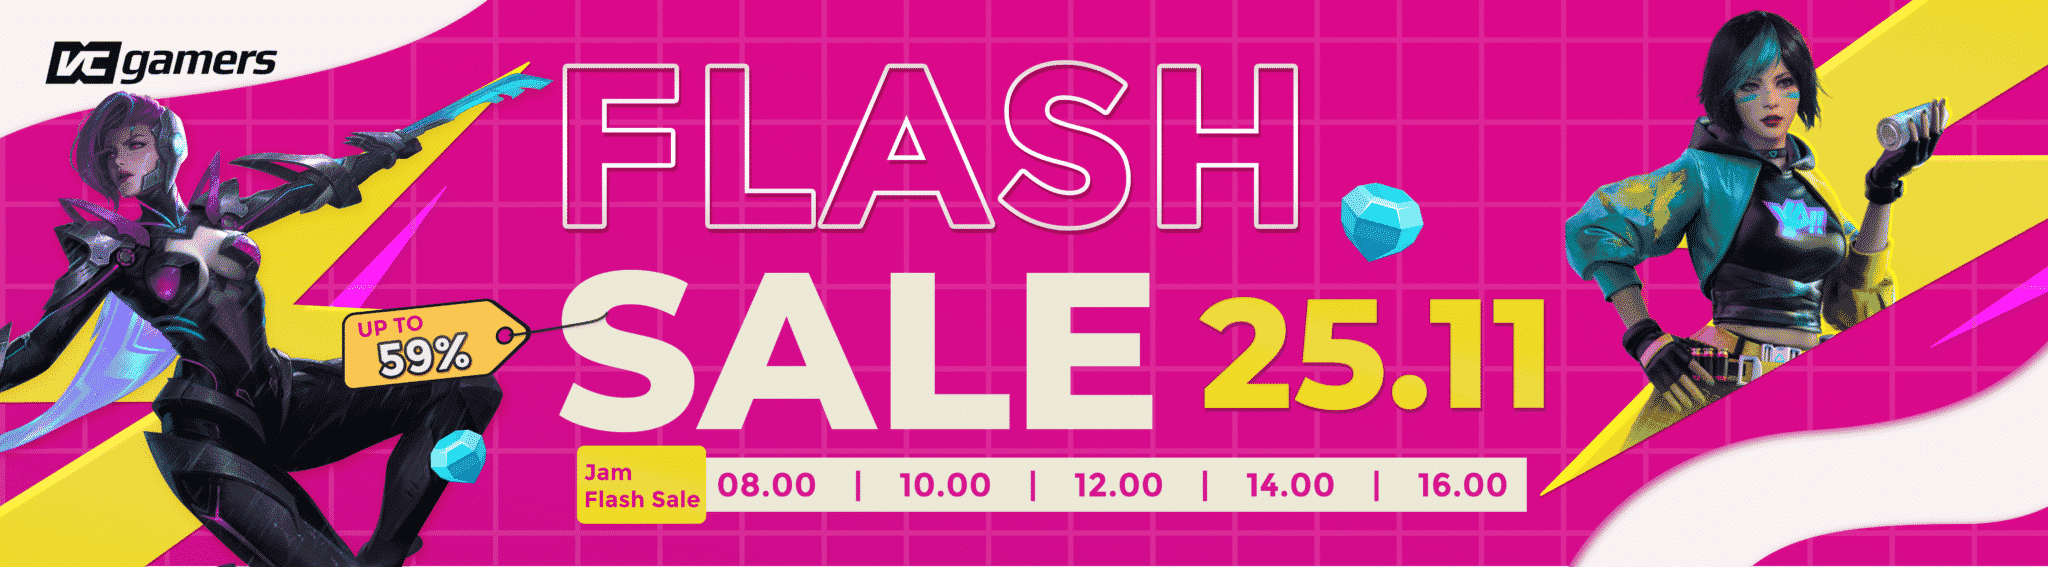 flashsale 25.11 vcgamers